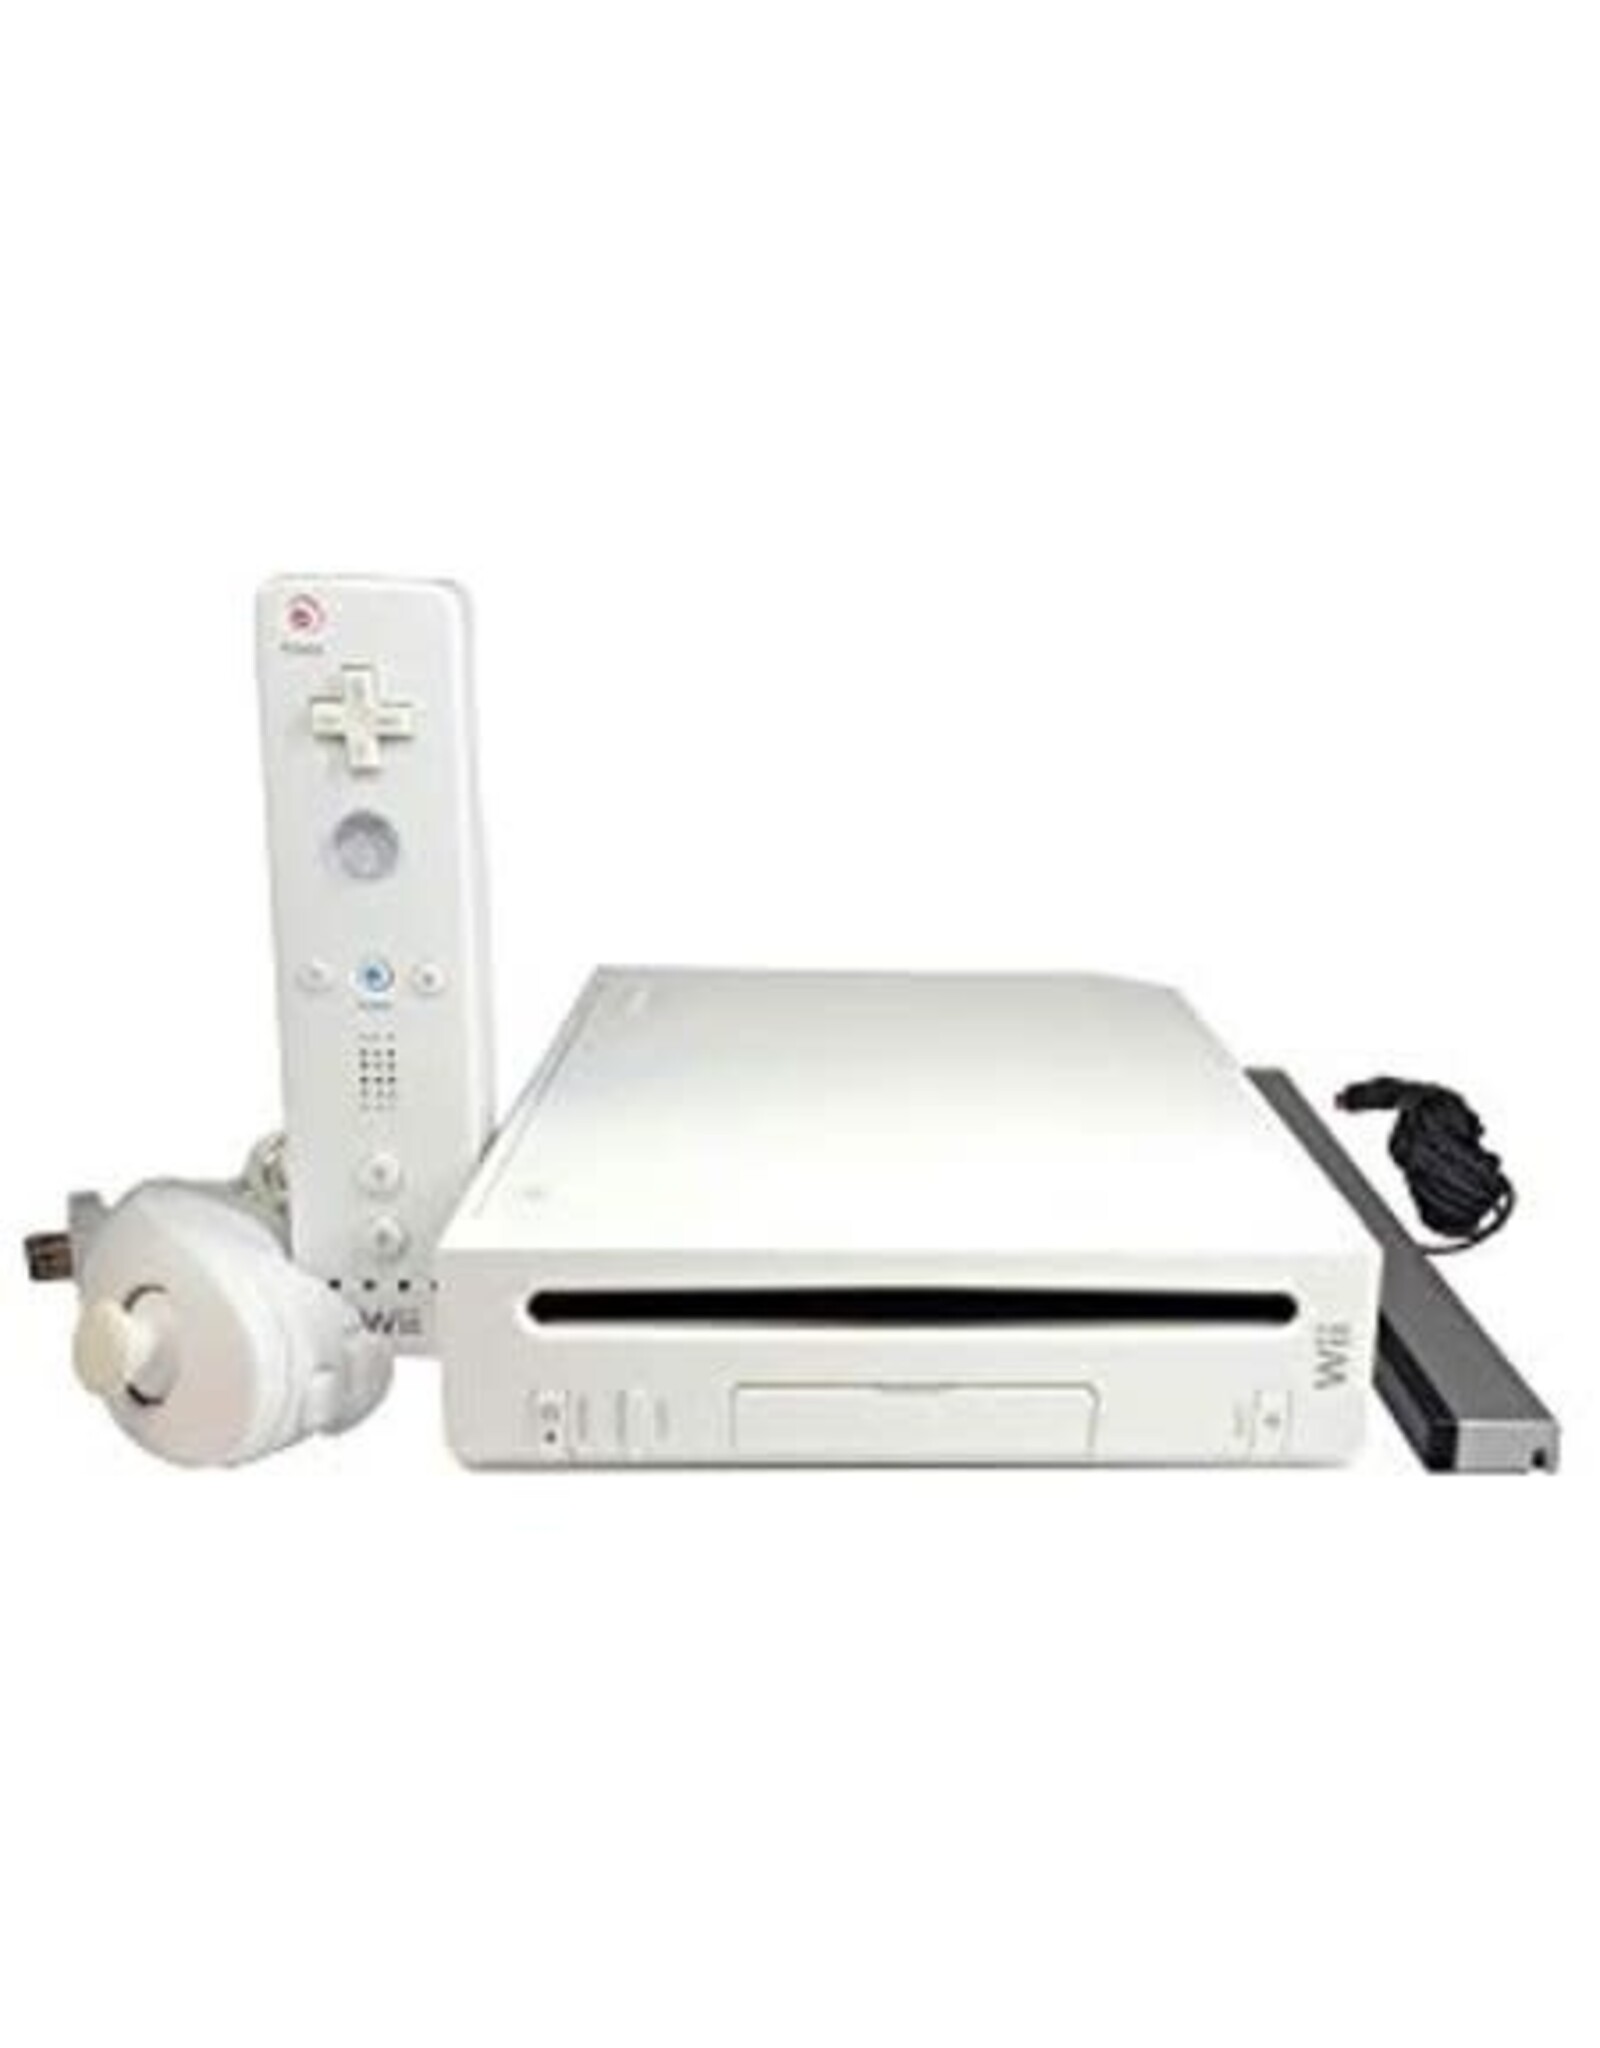 Wii Nintendo Wii Console - White, Backwards Compatible (Used, Cosmetic Damage)